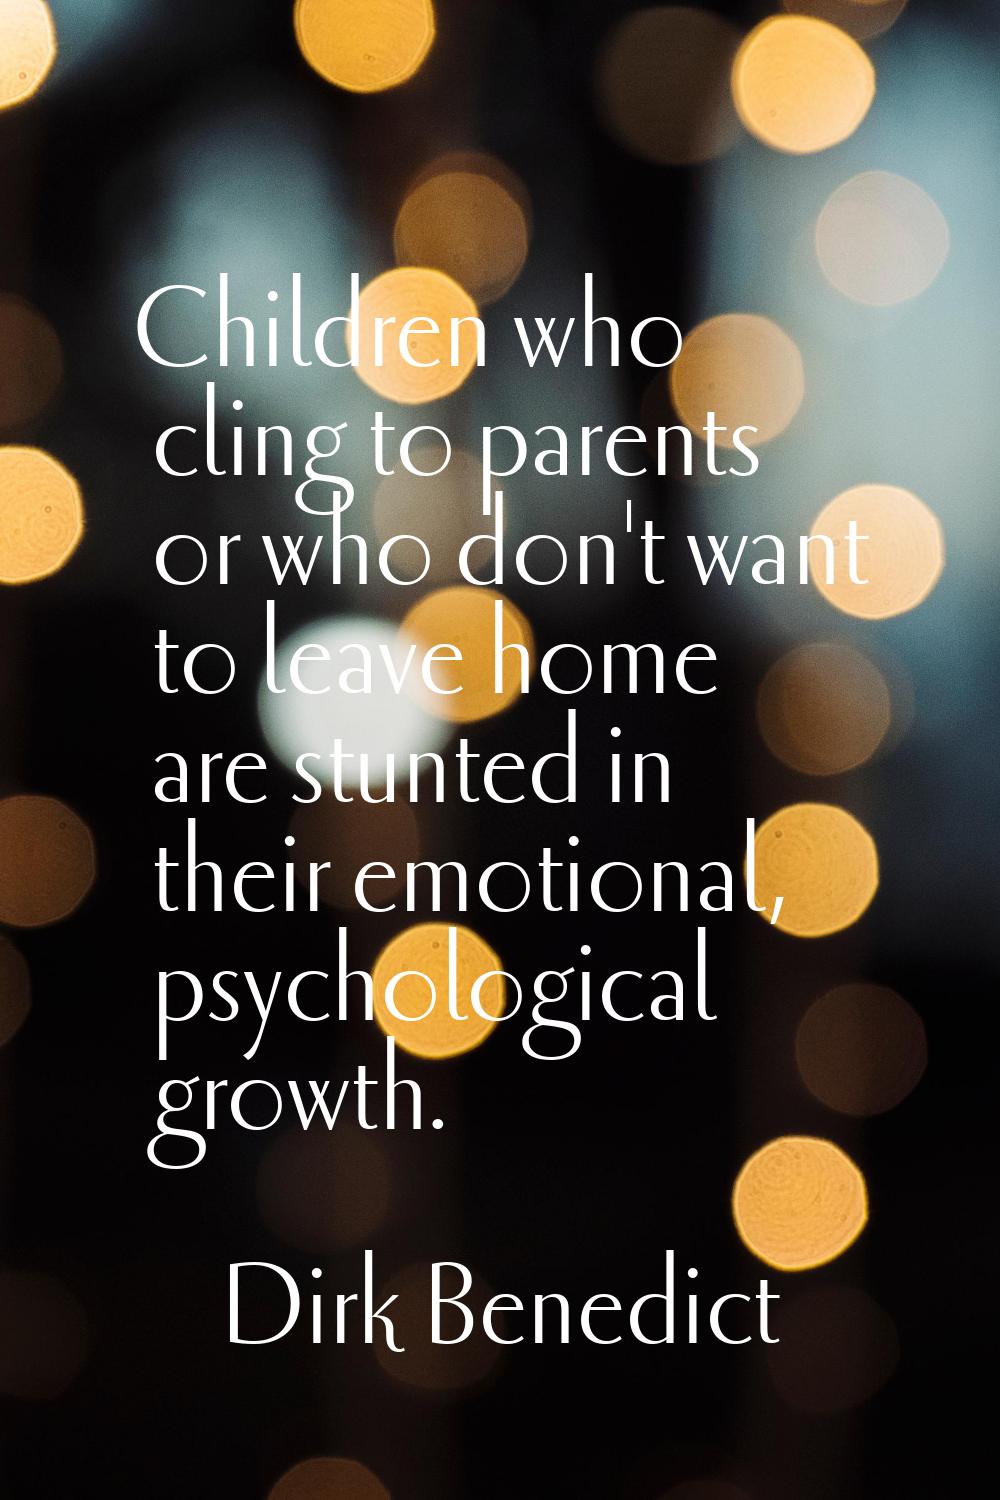 Children who cling to parents or who don't want to leave home are stunted in their emotional, psych